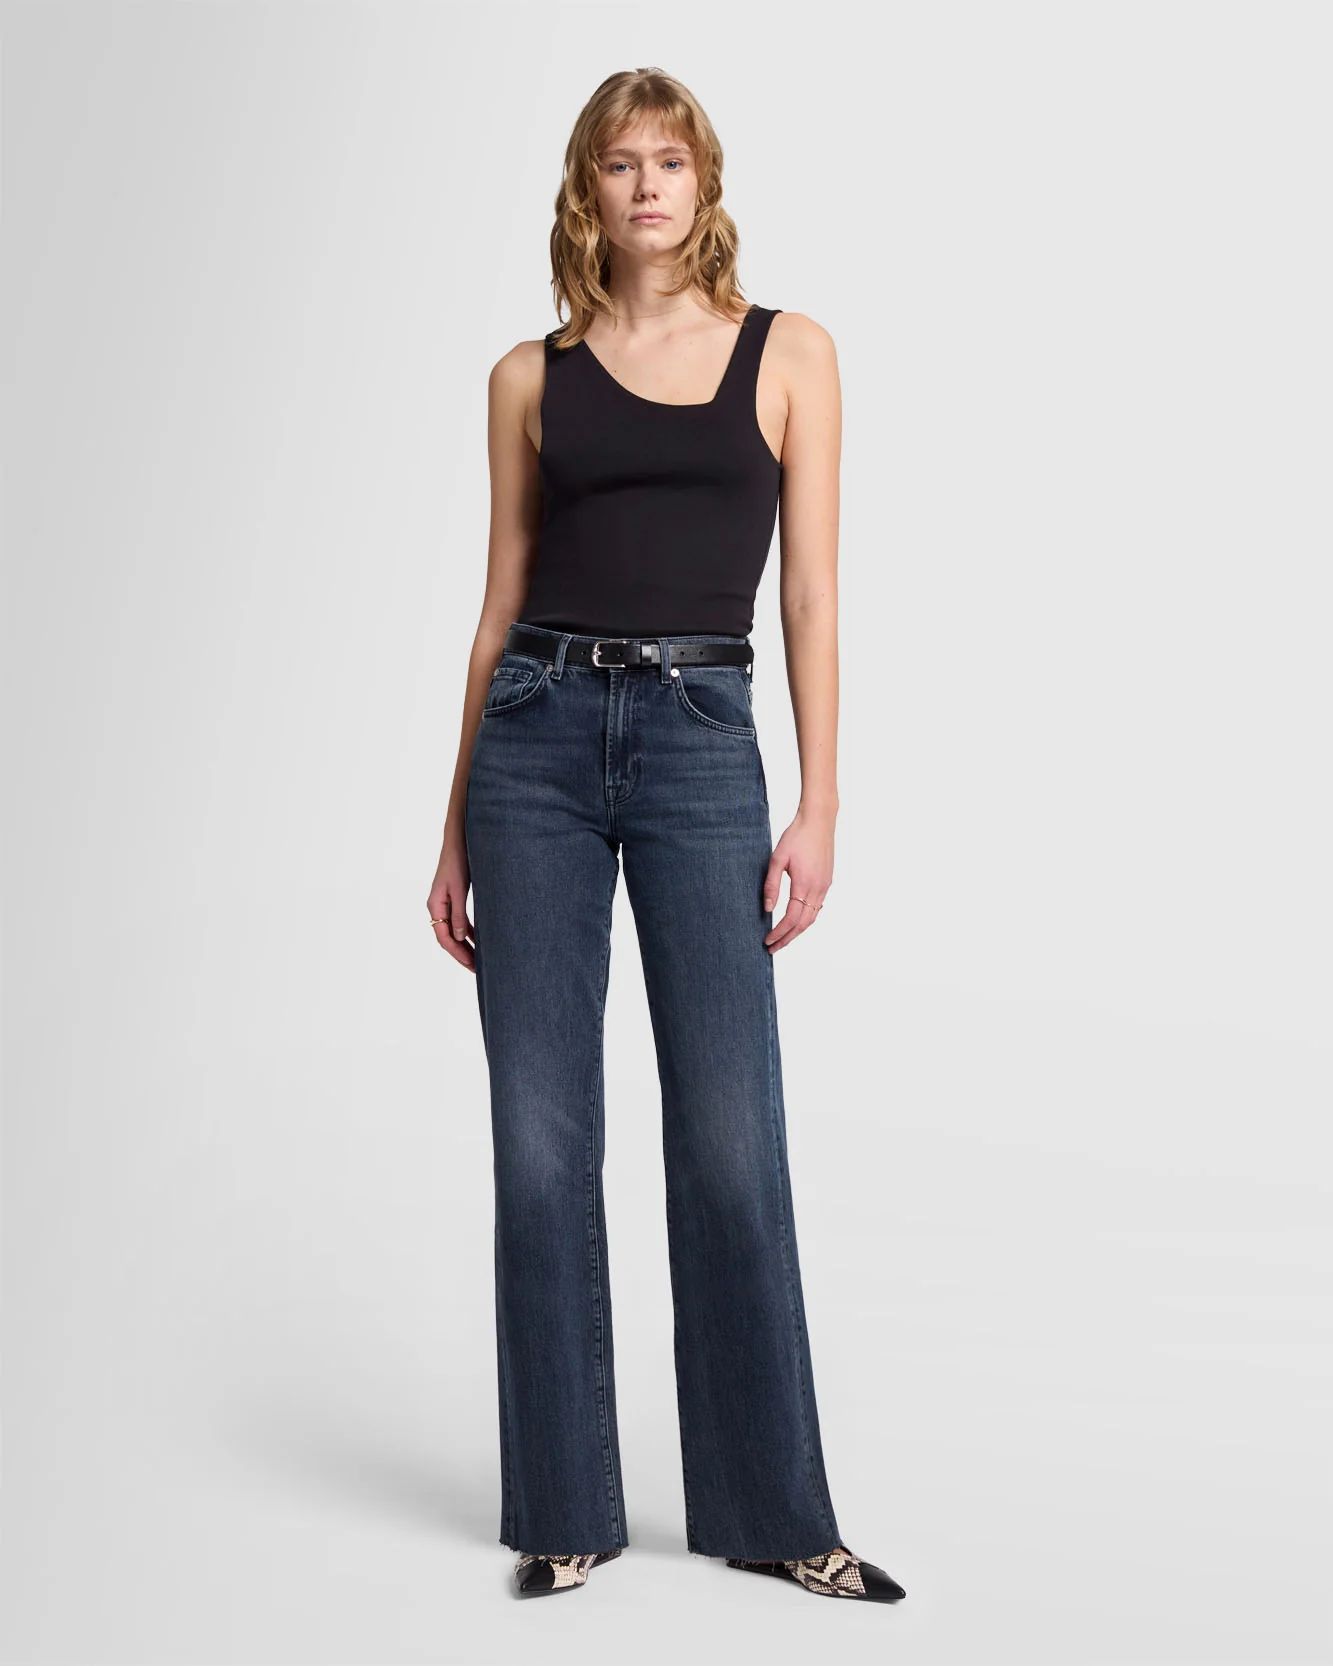 MANKIND Tess Trouser in Full Moon | 7 For All Mankind